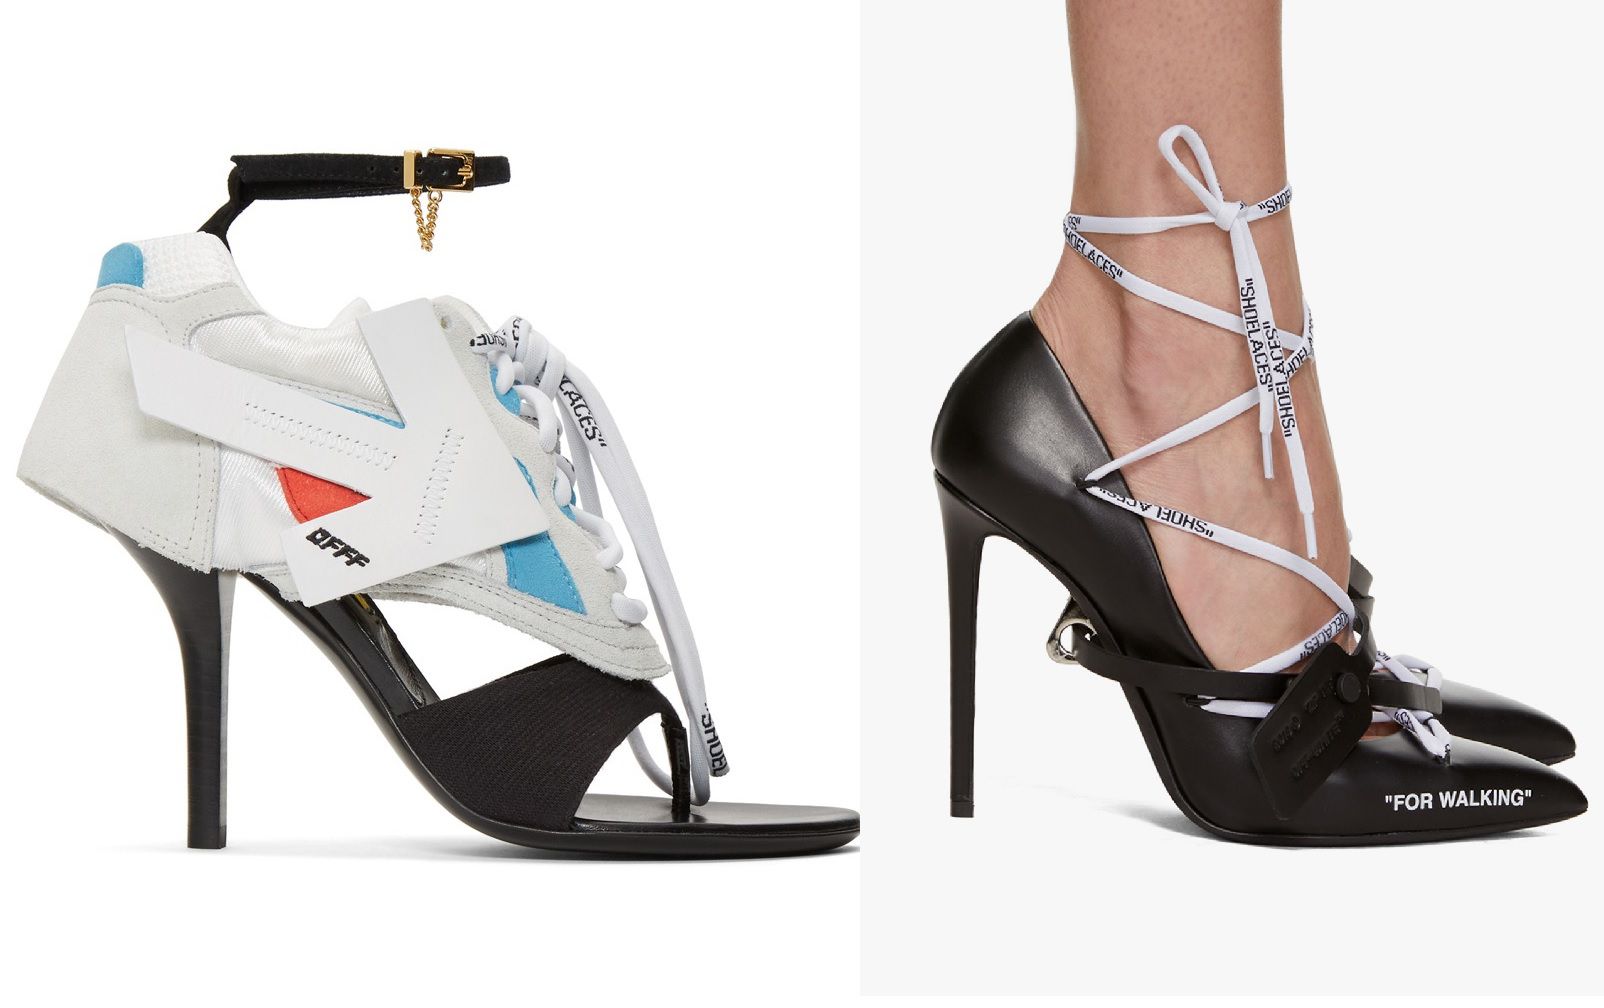 Where to buy the new Off-White Heel